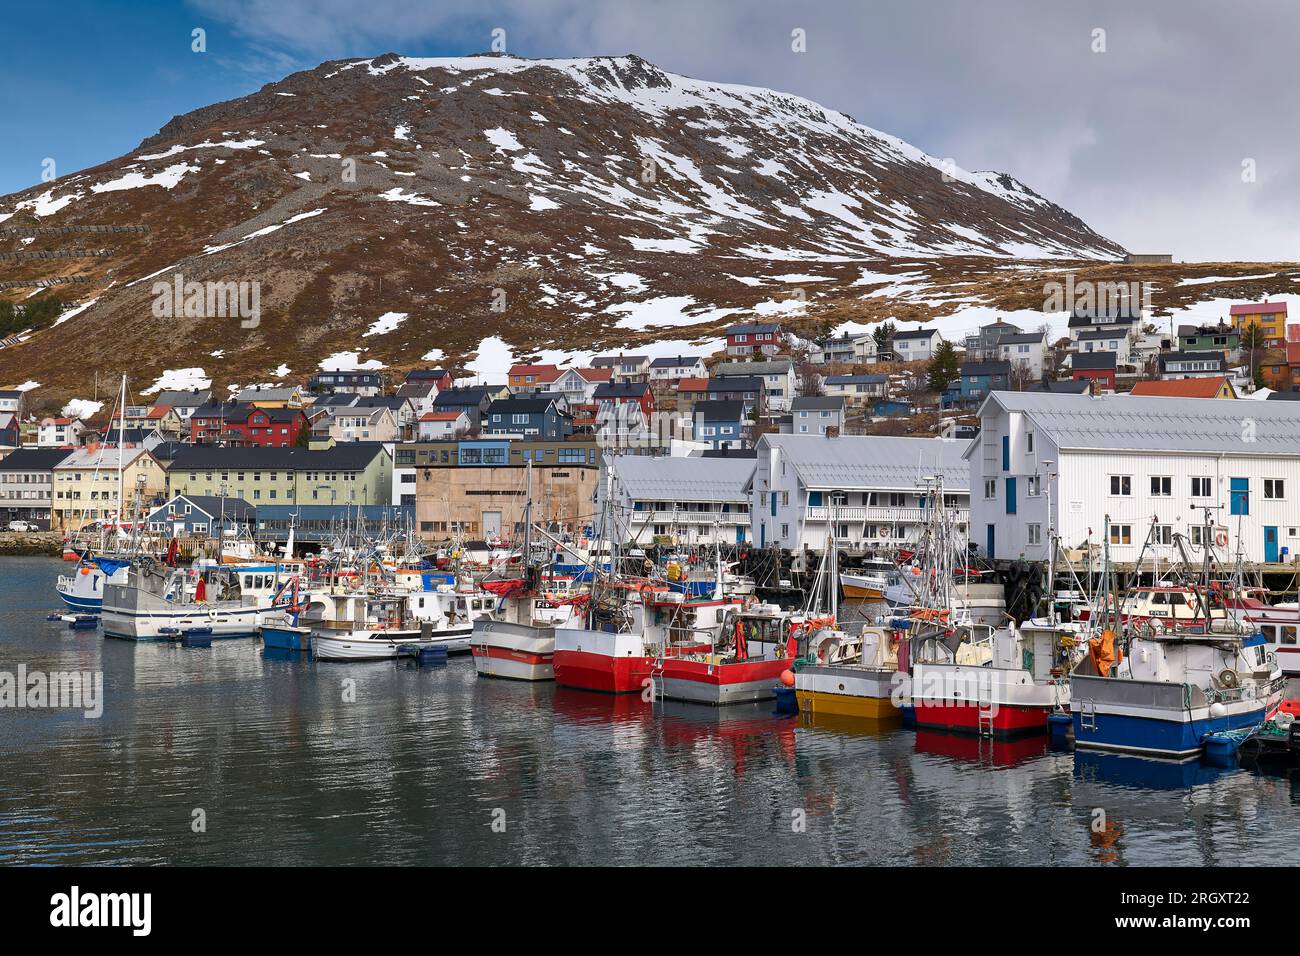 The Small Norwegian City Of Honningsvåg, Located On The Island Of Magerøya Far North Of The Arctic Circle, Norway. 5 May 2023 Stock Photo